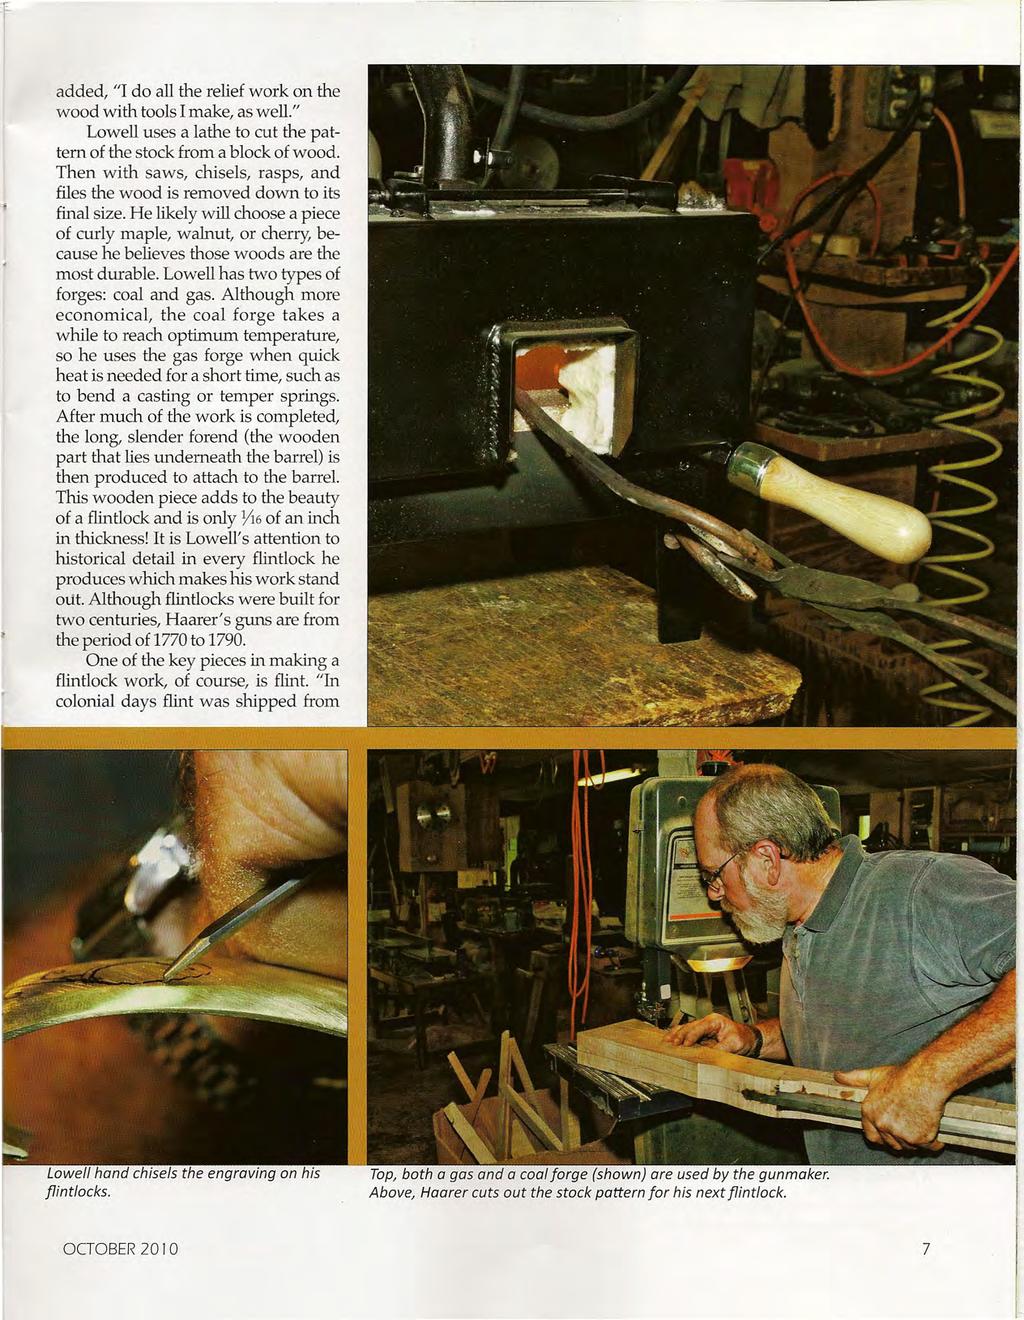 'f added, "I do all the relief work on the wood with tools I make, as well." Lowell uses a lathe to cut the pattern of the stock from a block of wood.